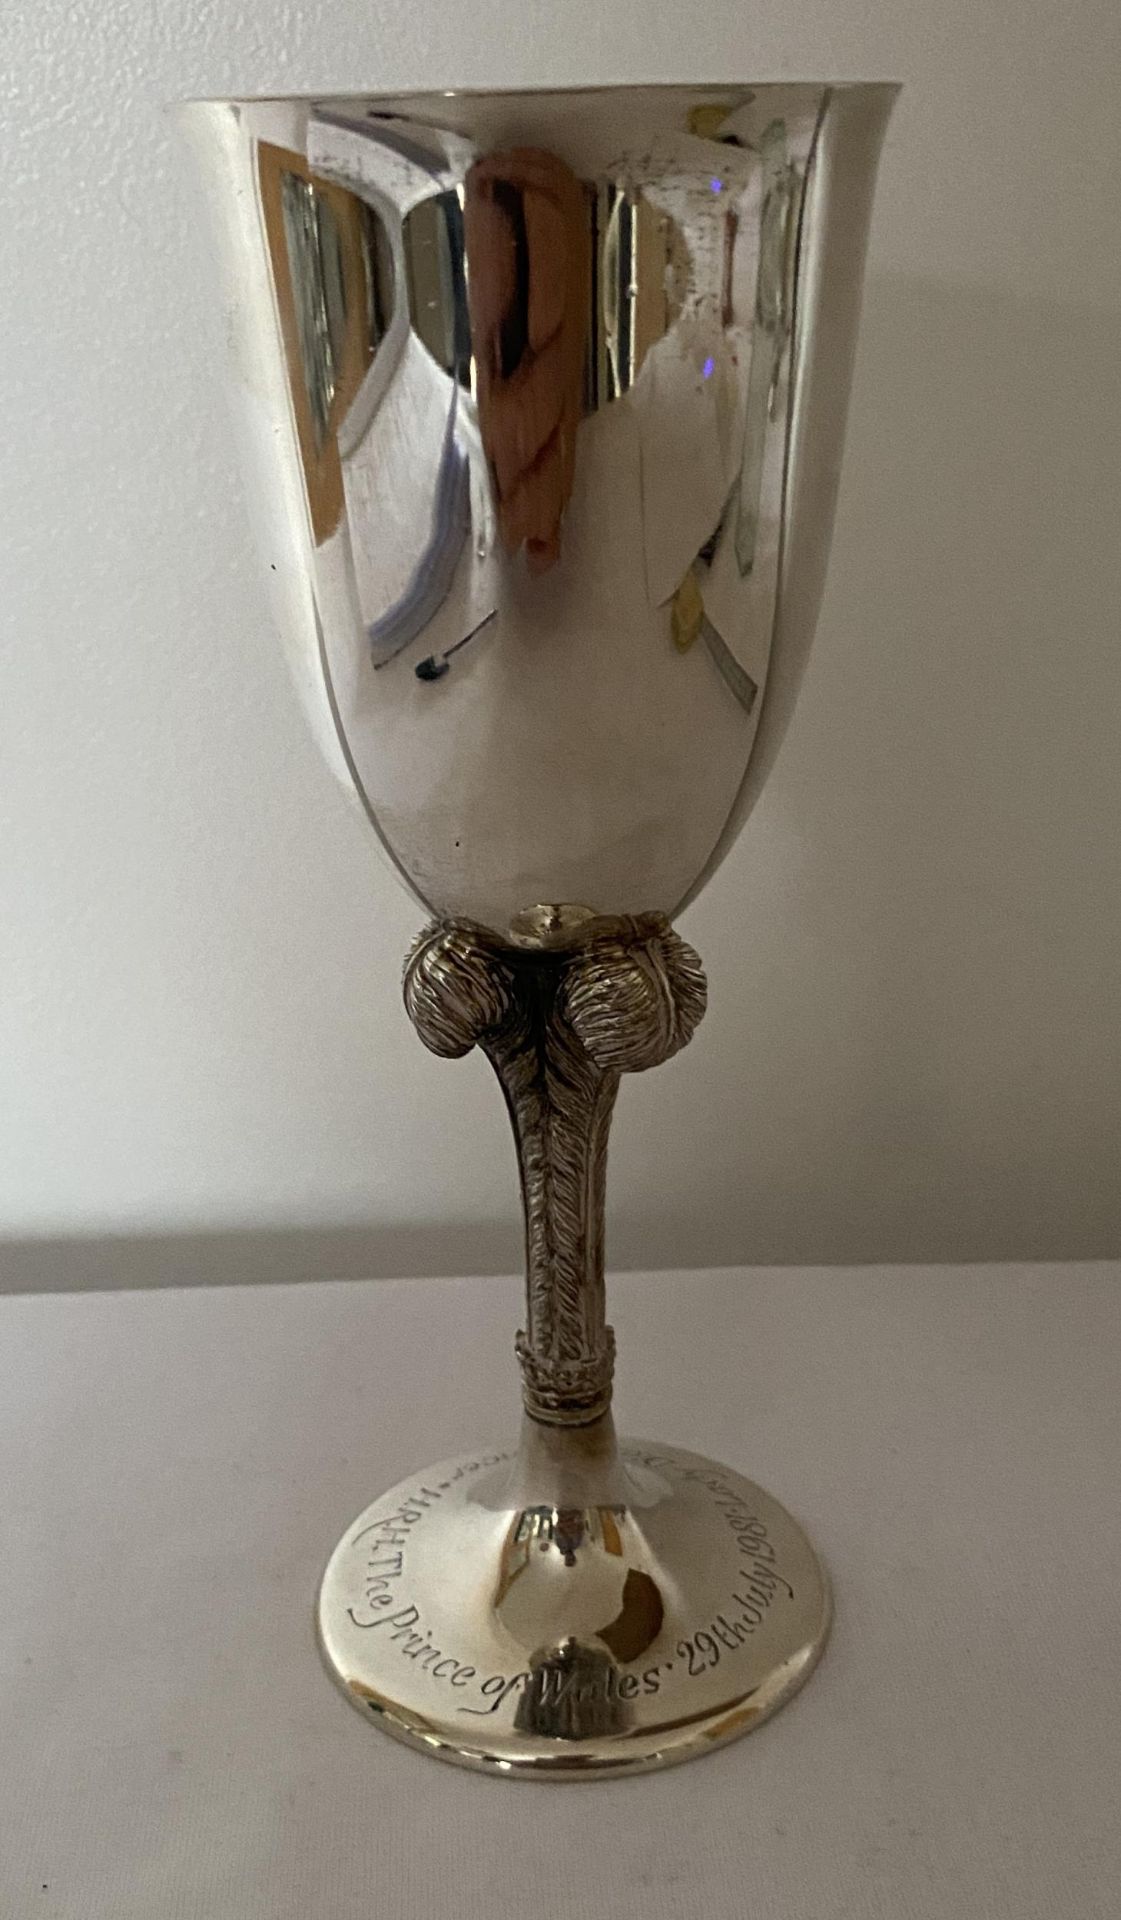 AN ELIZABETH II 1981 HALLMARKED LONDON SILVER COMMEMORATIVE LADY DIANA AND PRINCE CHARLES GOBLET - Image 2 of 24